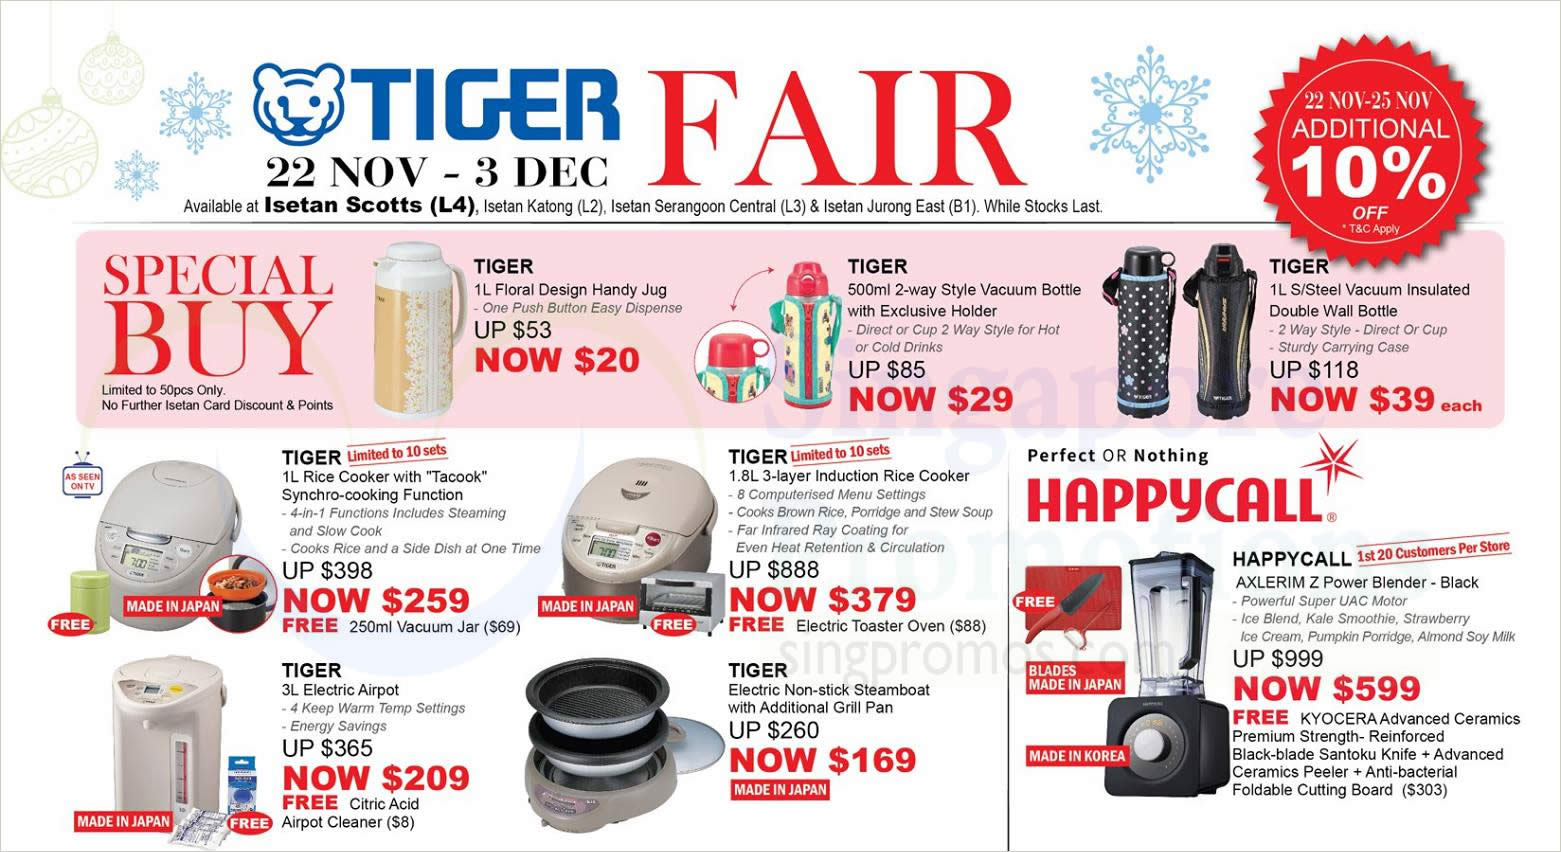 Featured image for Isetan's Tiger Fair to return with discounts of up to 70% off from 22 November to 3 December 2018